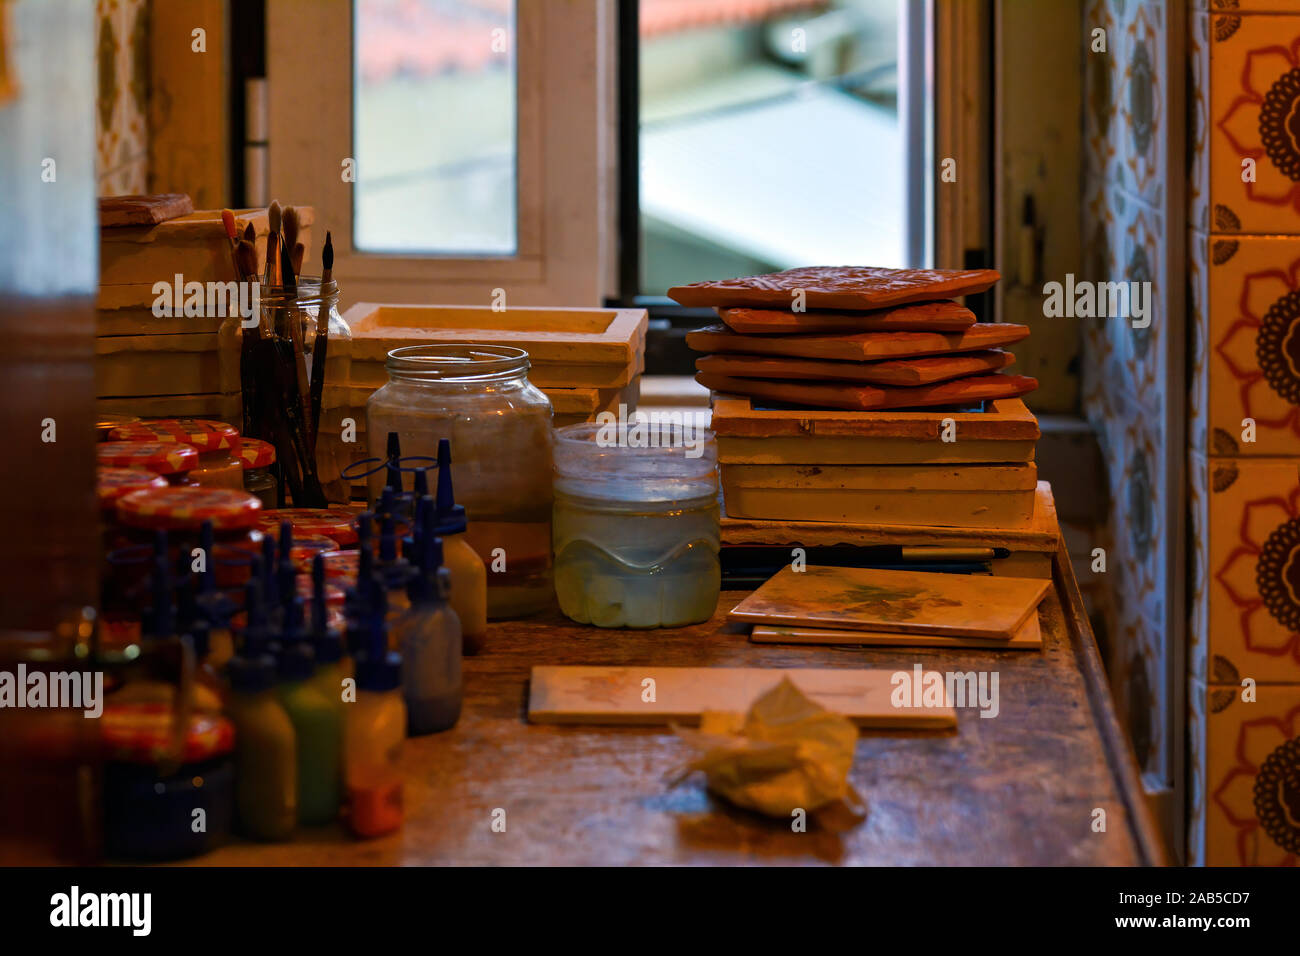 Ceramic tiles, dyes and brushes in a rustic room. Portuguese tradition. Stock Photo